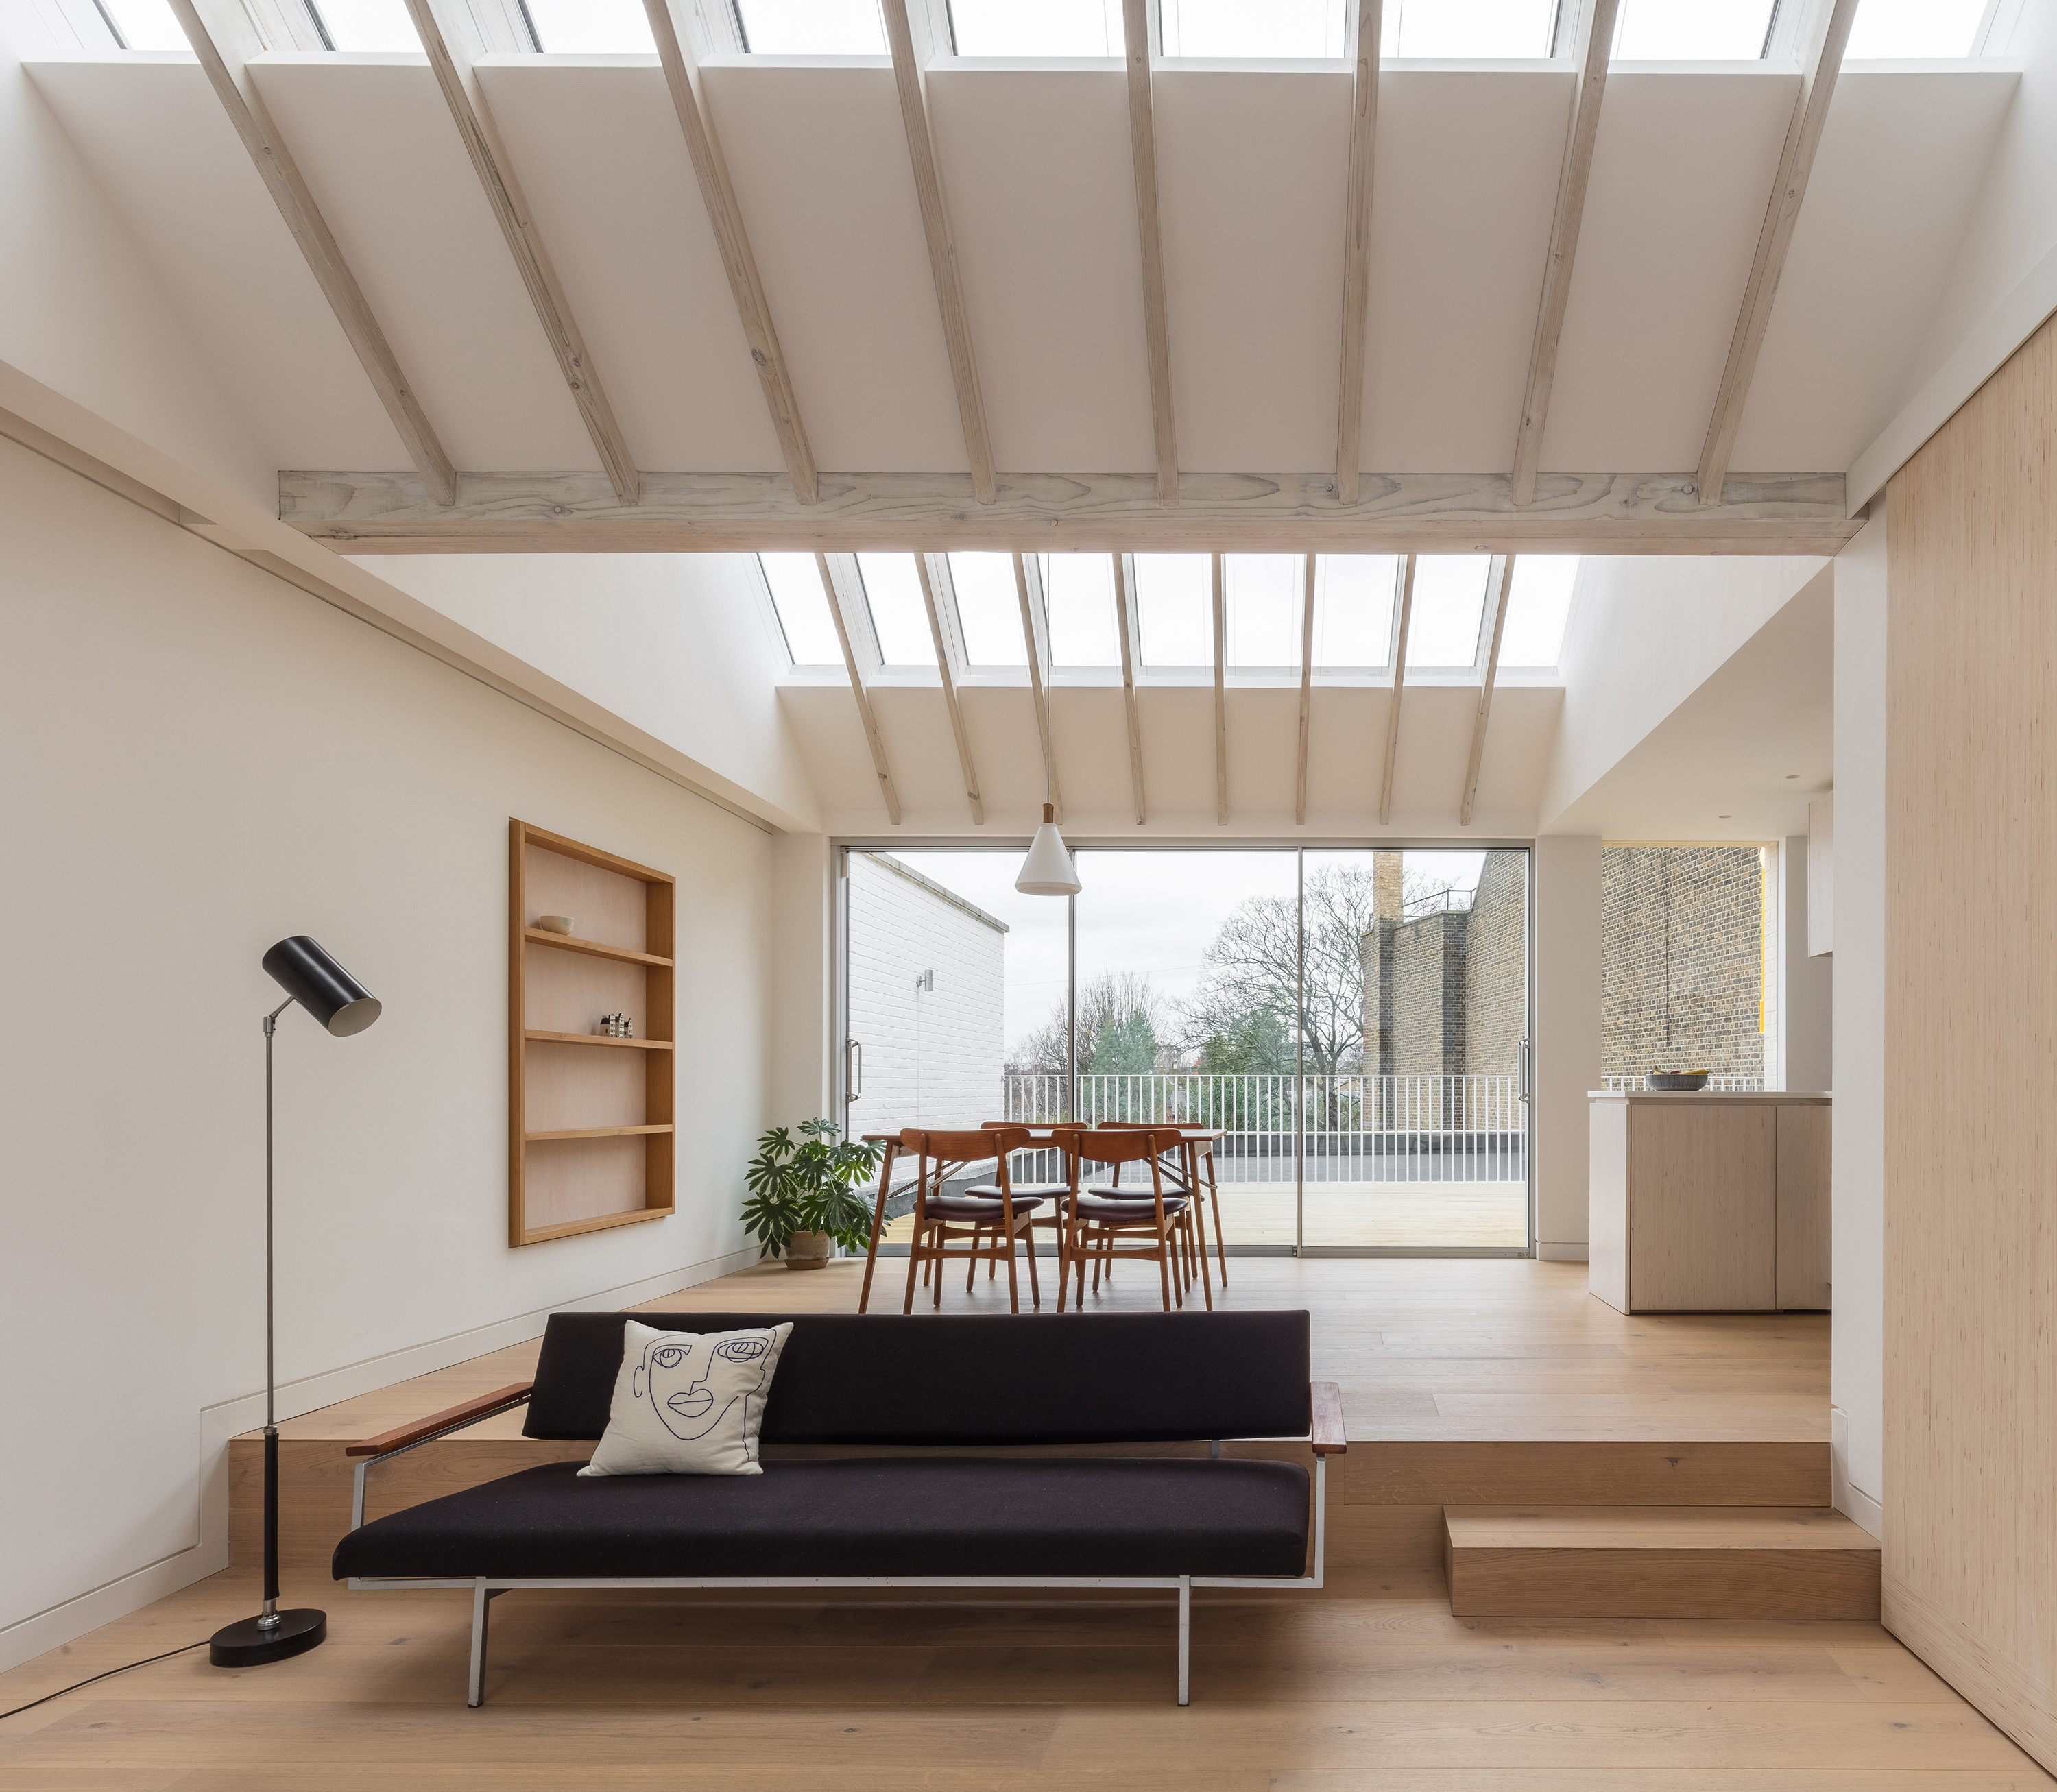 </p> <p>Find your ideal home design pro on designfor-me.com - get matched and see who's interested in your home project. Click image to see more inspiration from our design pros</p> <p>Design by Rory, architect from Tower Hamlets, London</p> <p>#architecture #homedesign #modernhomes #homeinspiration #skylights #rooflights #livingrooms #livingroomdesign #livingroominspiration #livingroomideas </p> <p>